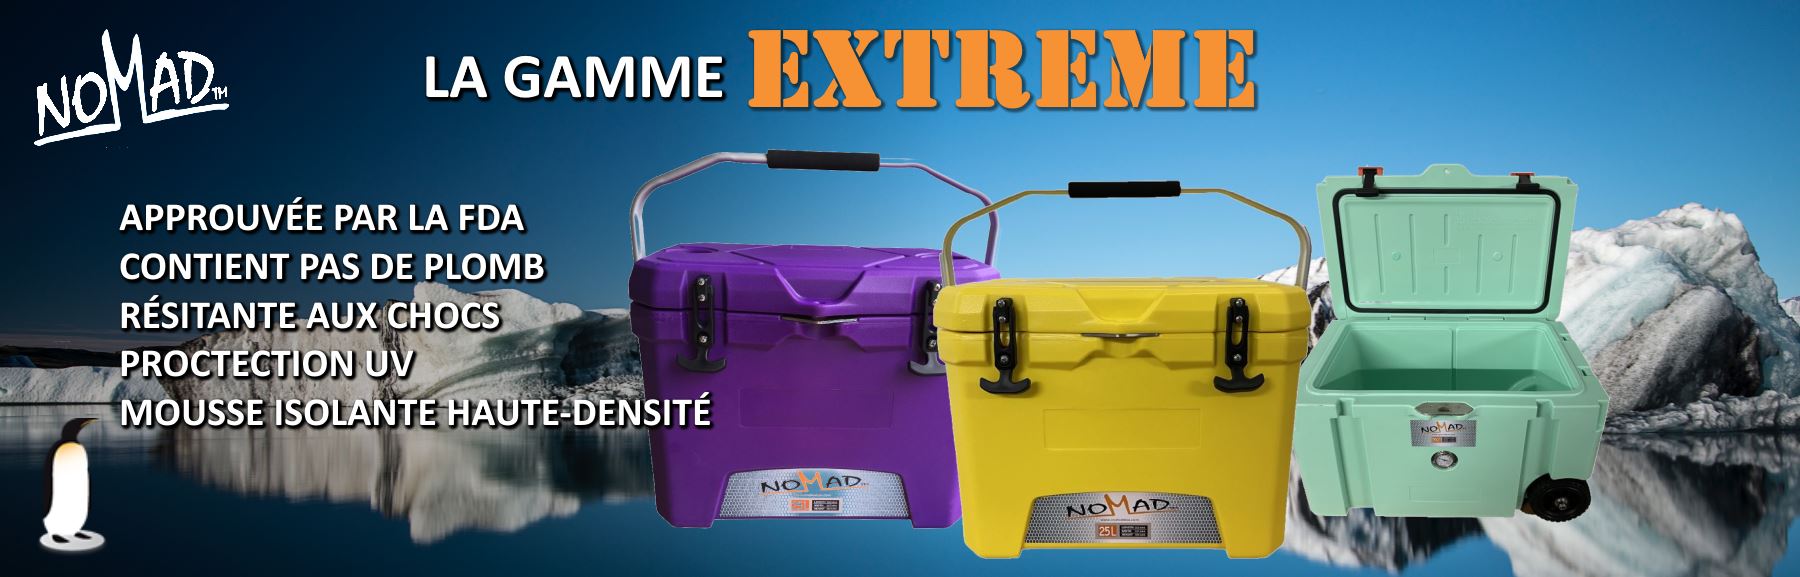 Gamme Extreme